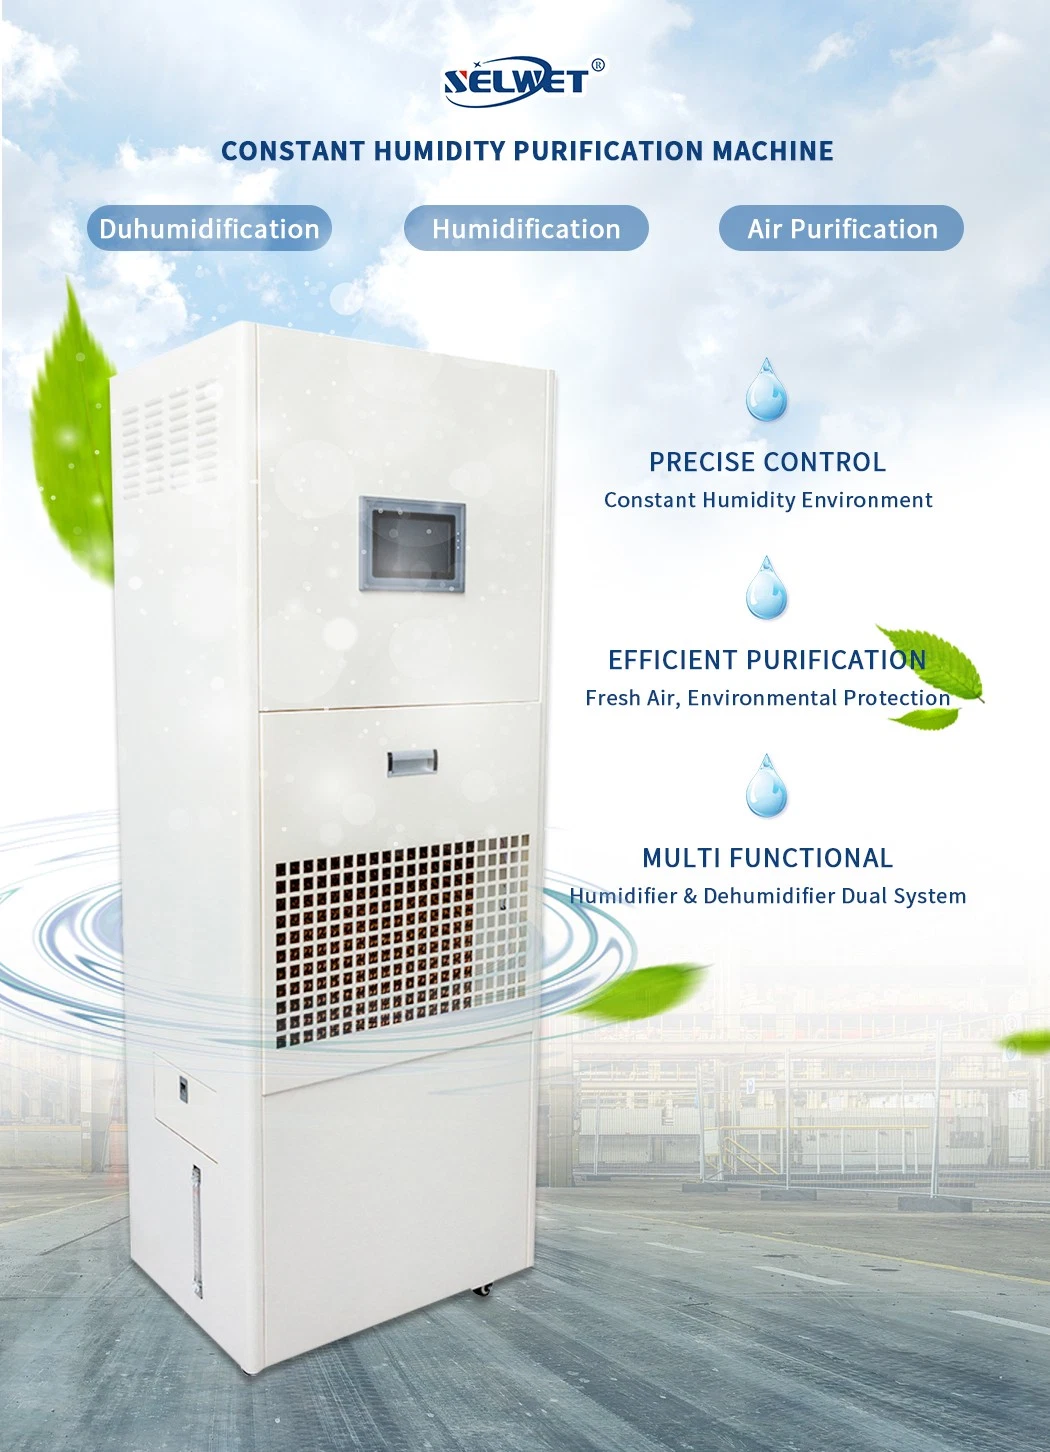 Silent Rotary Compressor Dehumidifier Constant Humidity Control Air Purification Machine